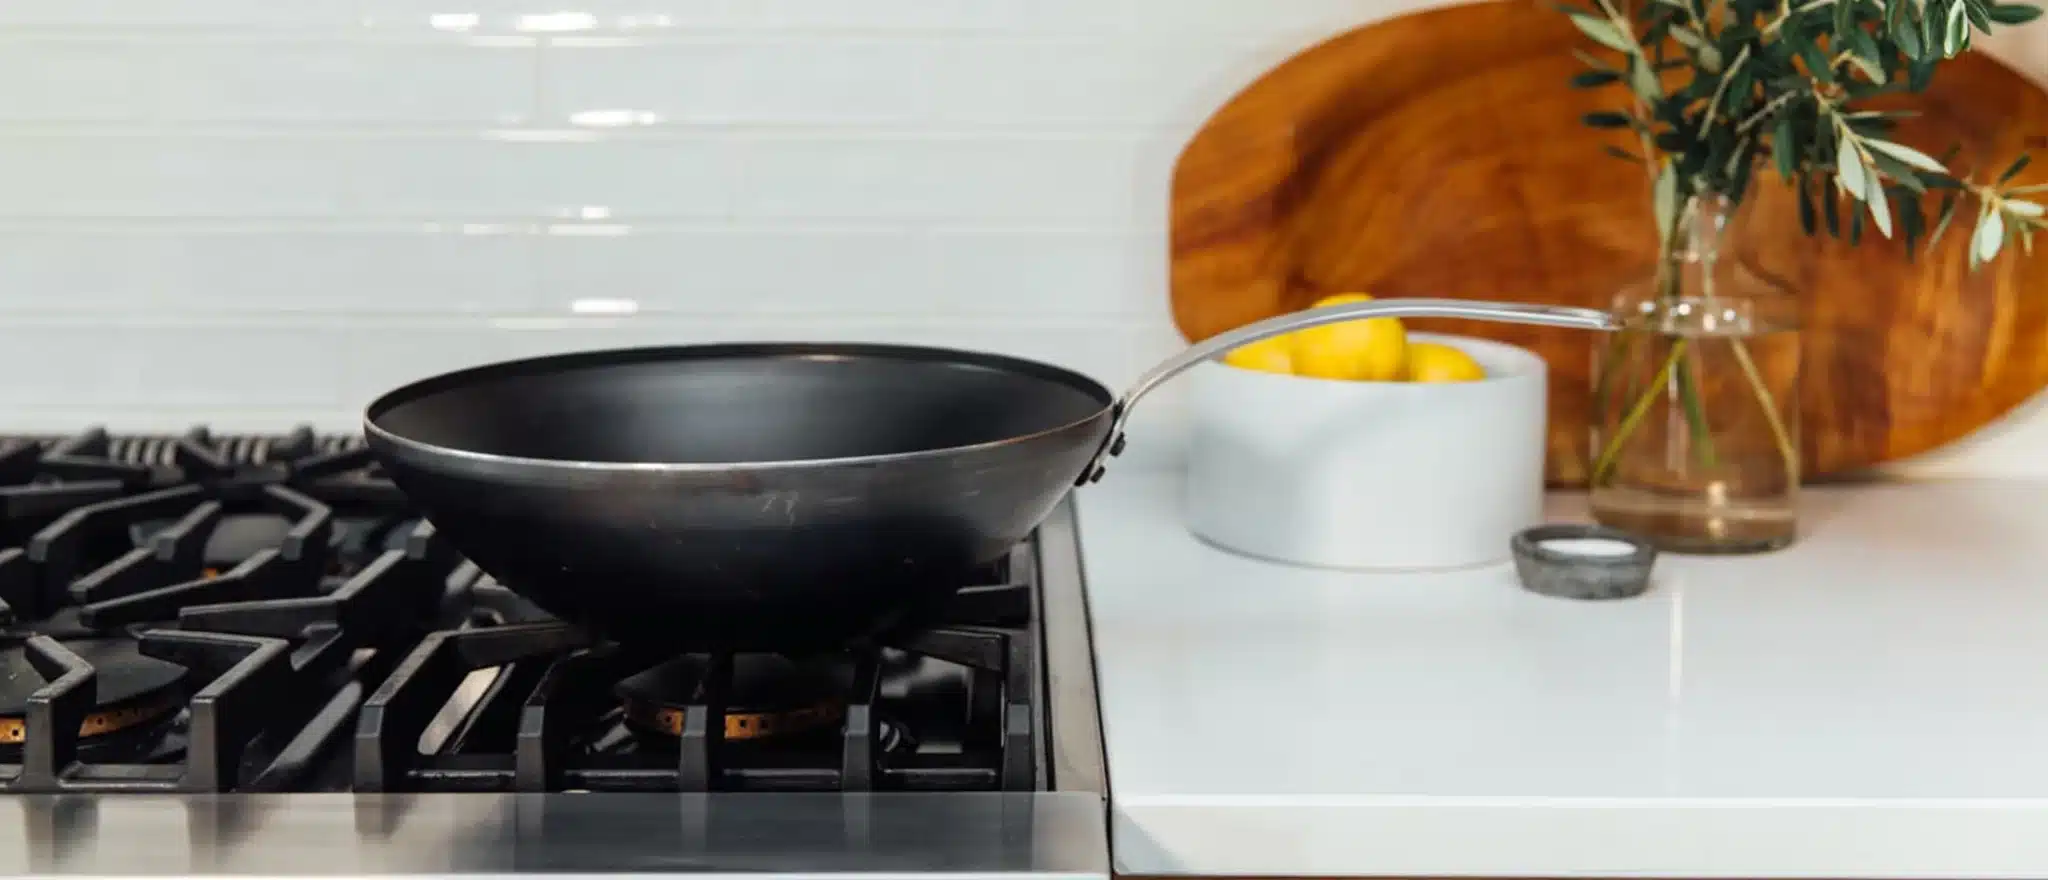 Eating Out Too Often? Consider This Wok